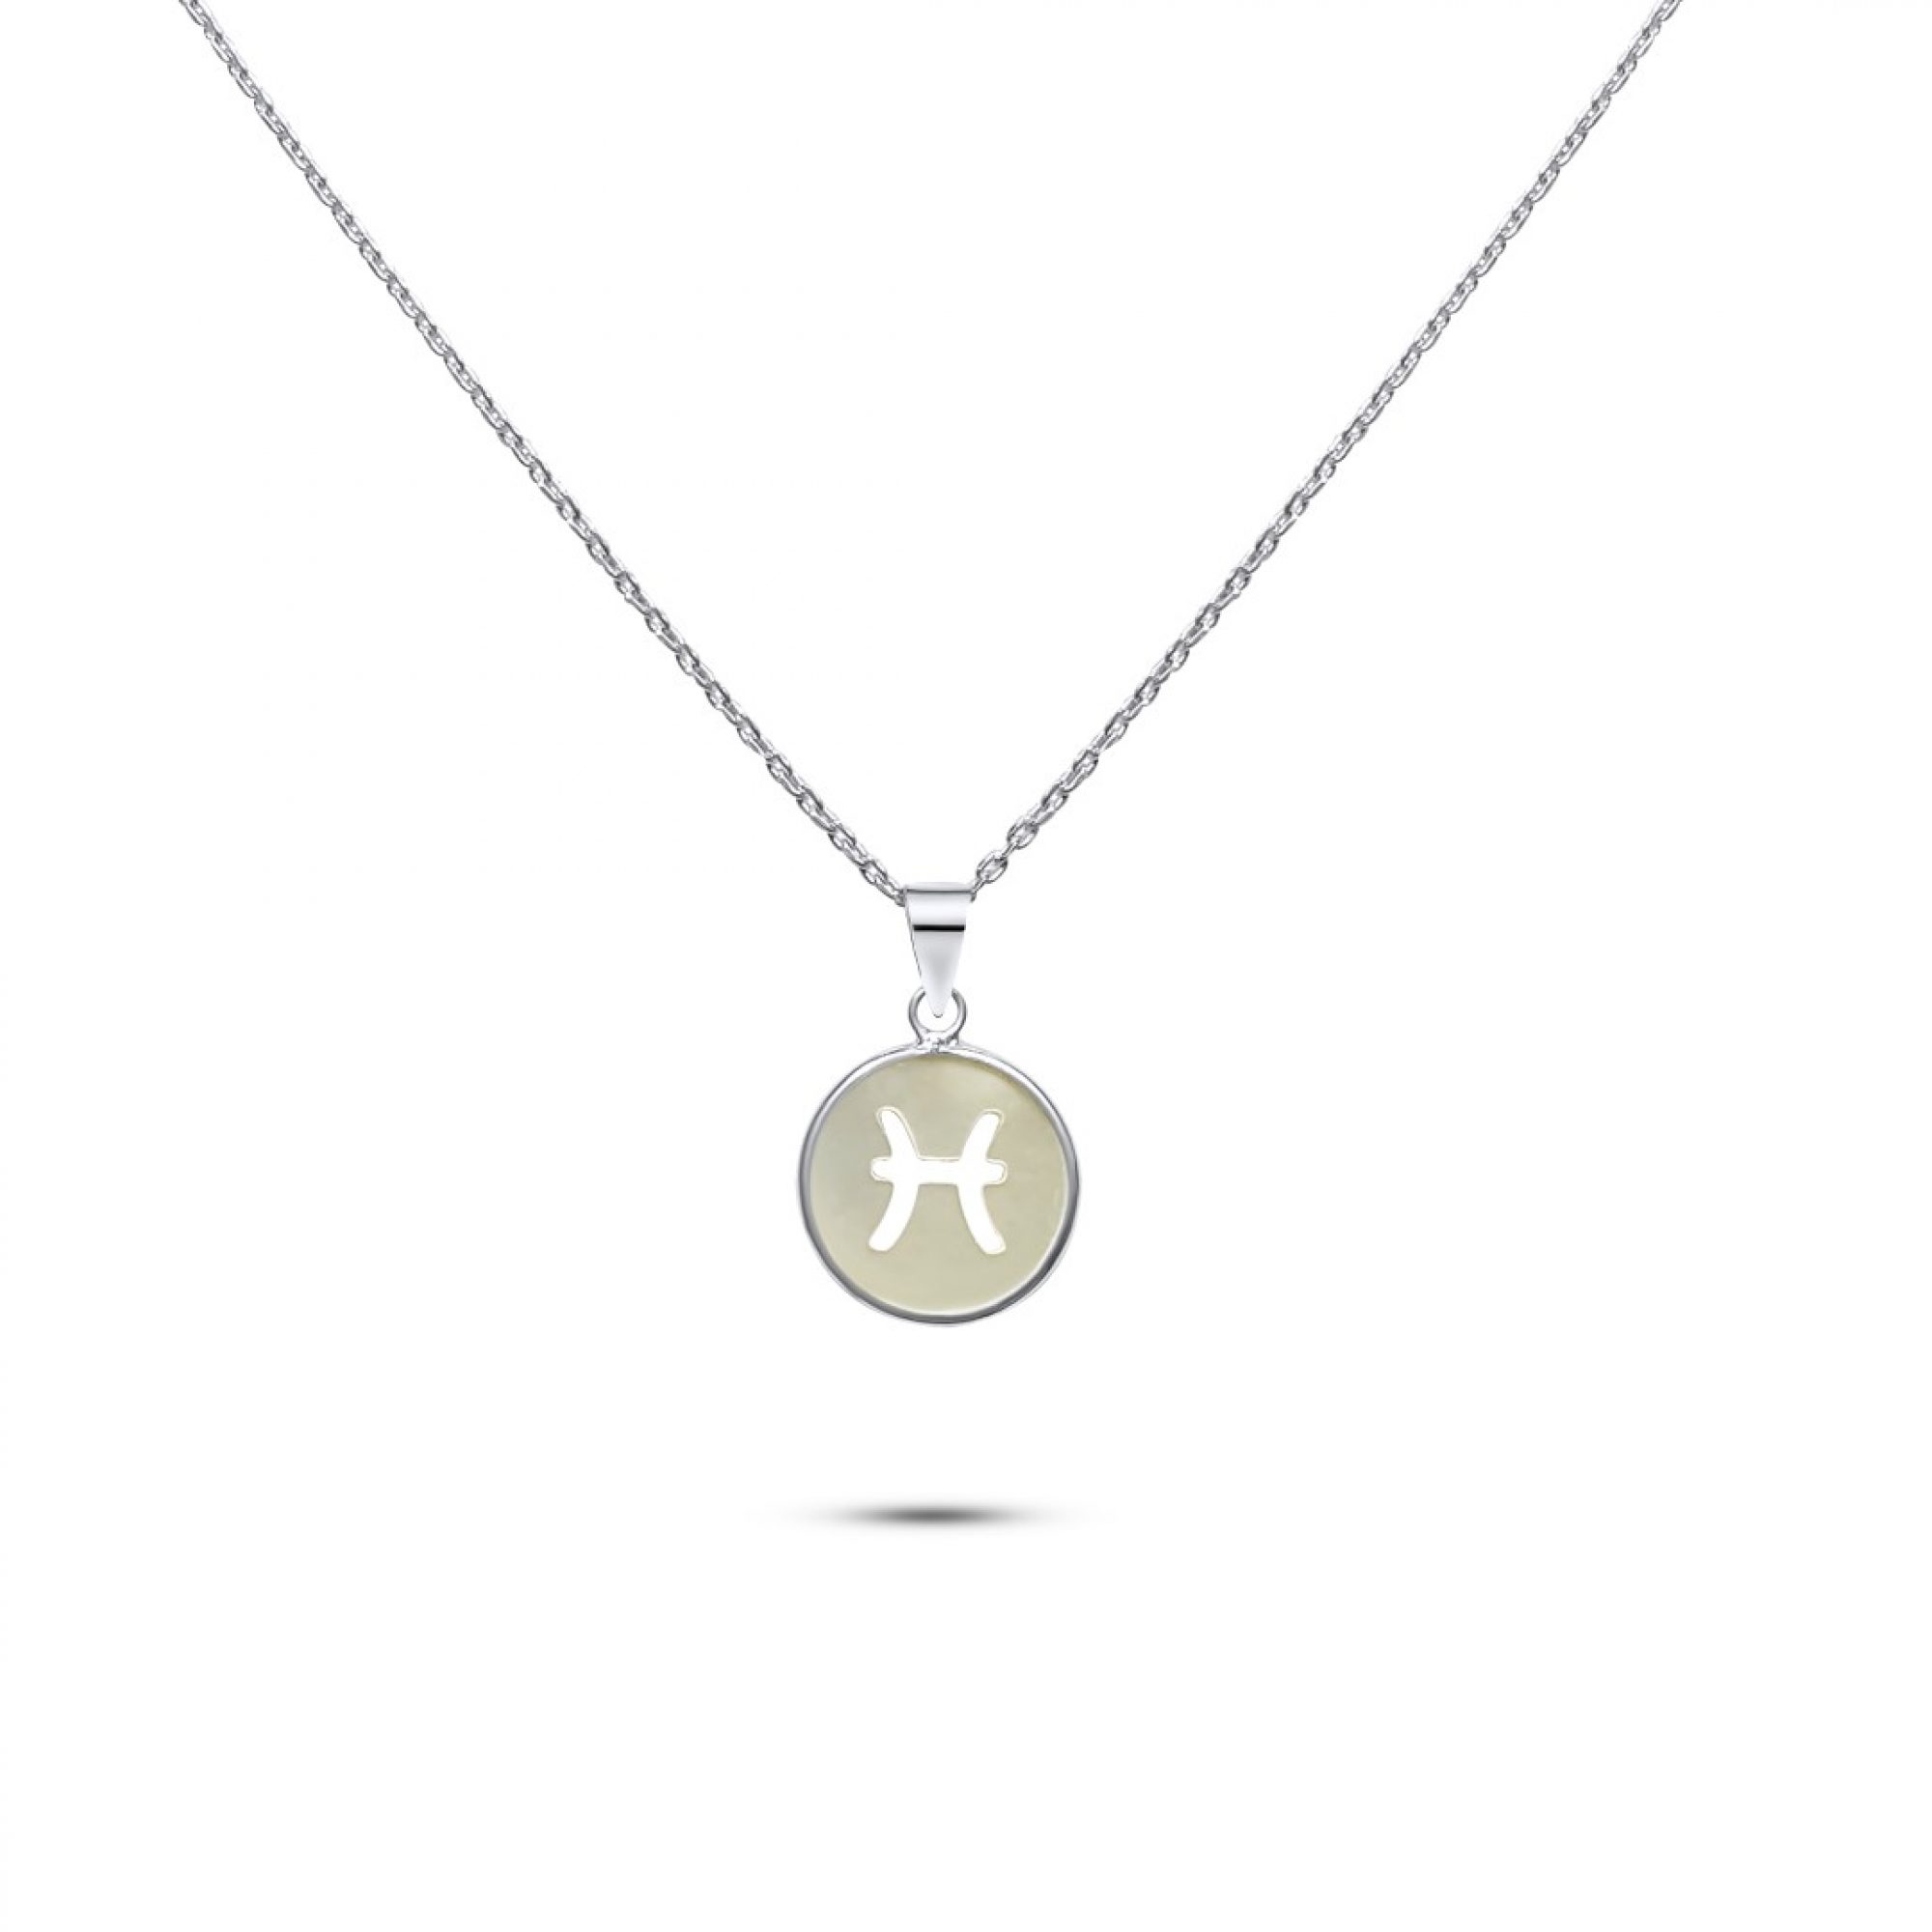 Pisces sign necklace with mother of pearl